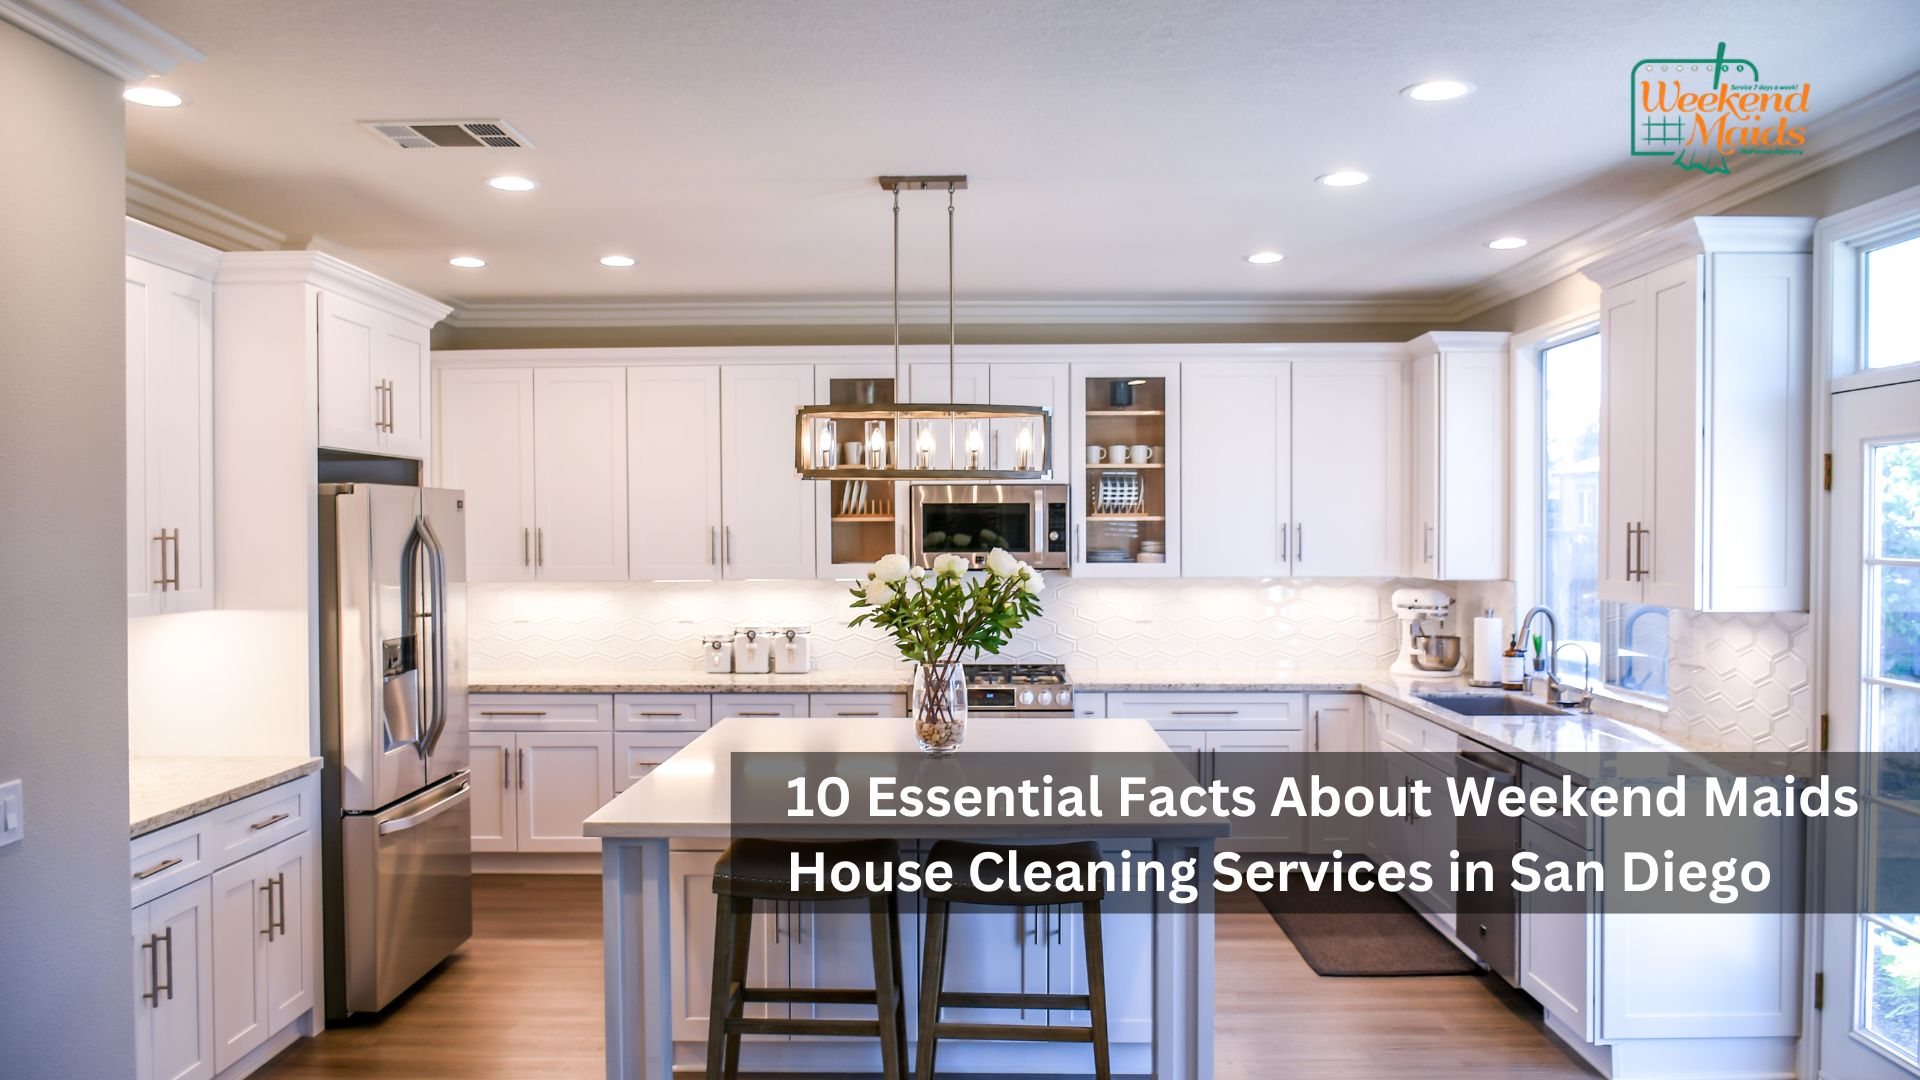 10 Essential Facts About Weekend Maids House Cleaning Services in San Diego